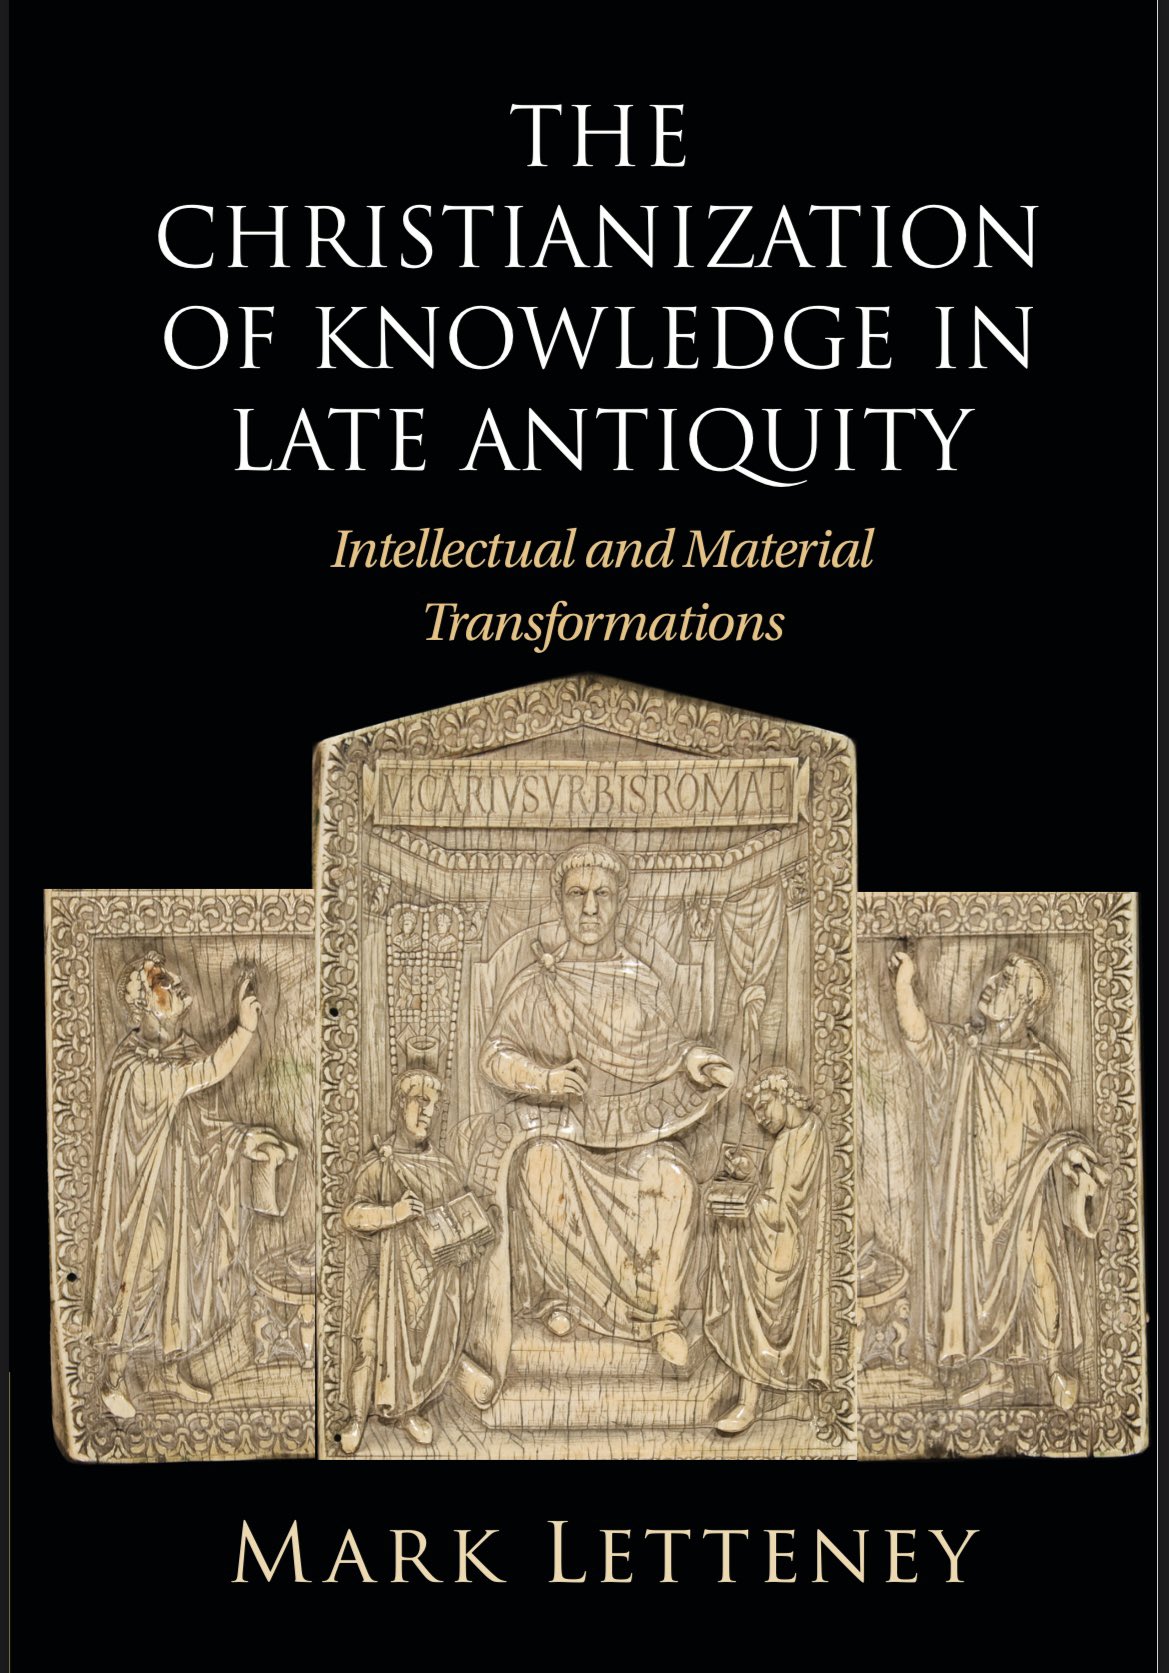 Prof Mark Letteney’s newest book to be released November 2023, “The Christianization of Knowledge in Late Antiquity Intellectual and Material Transformations”